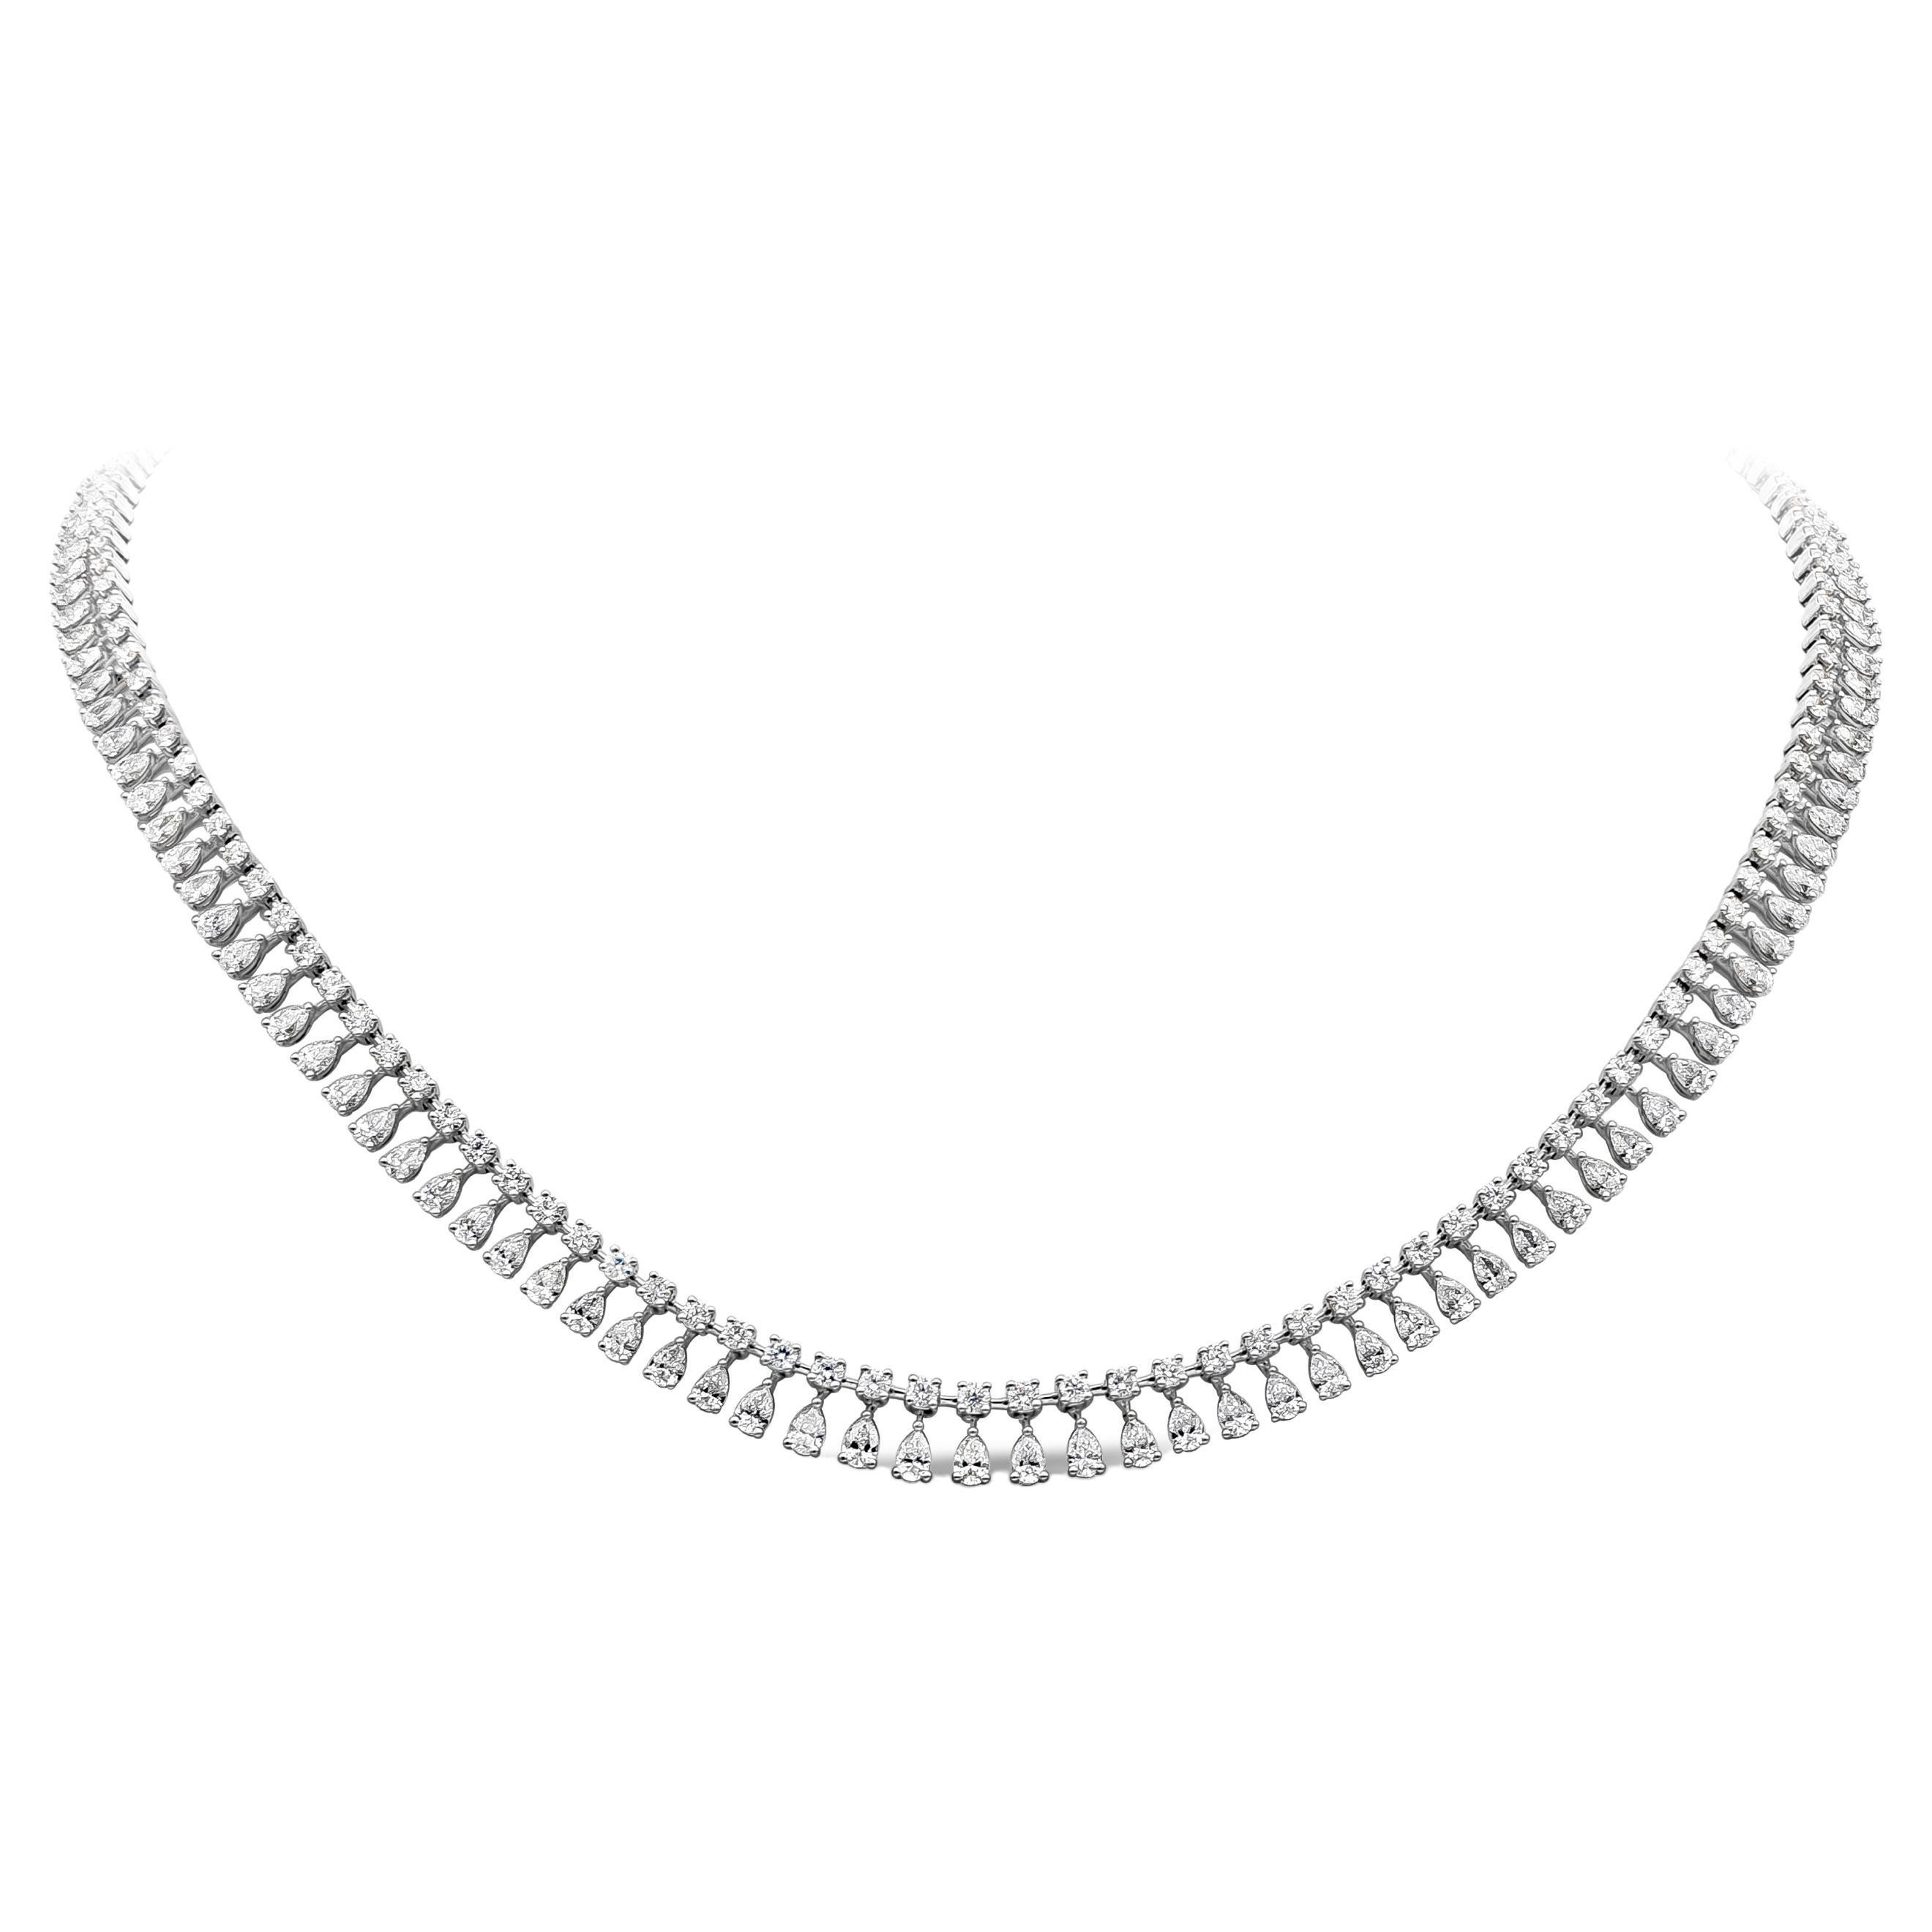 Roman Malakov, 10.99 Total Carats Round and Pear Shape Diamond Riviere Necklace For Sale